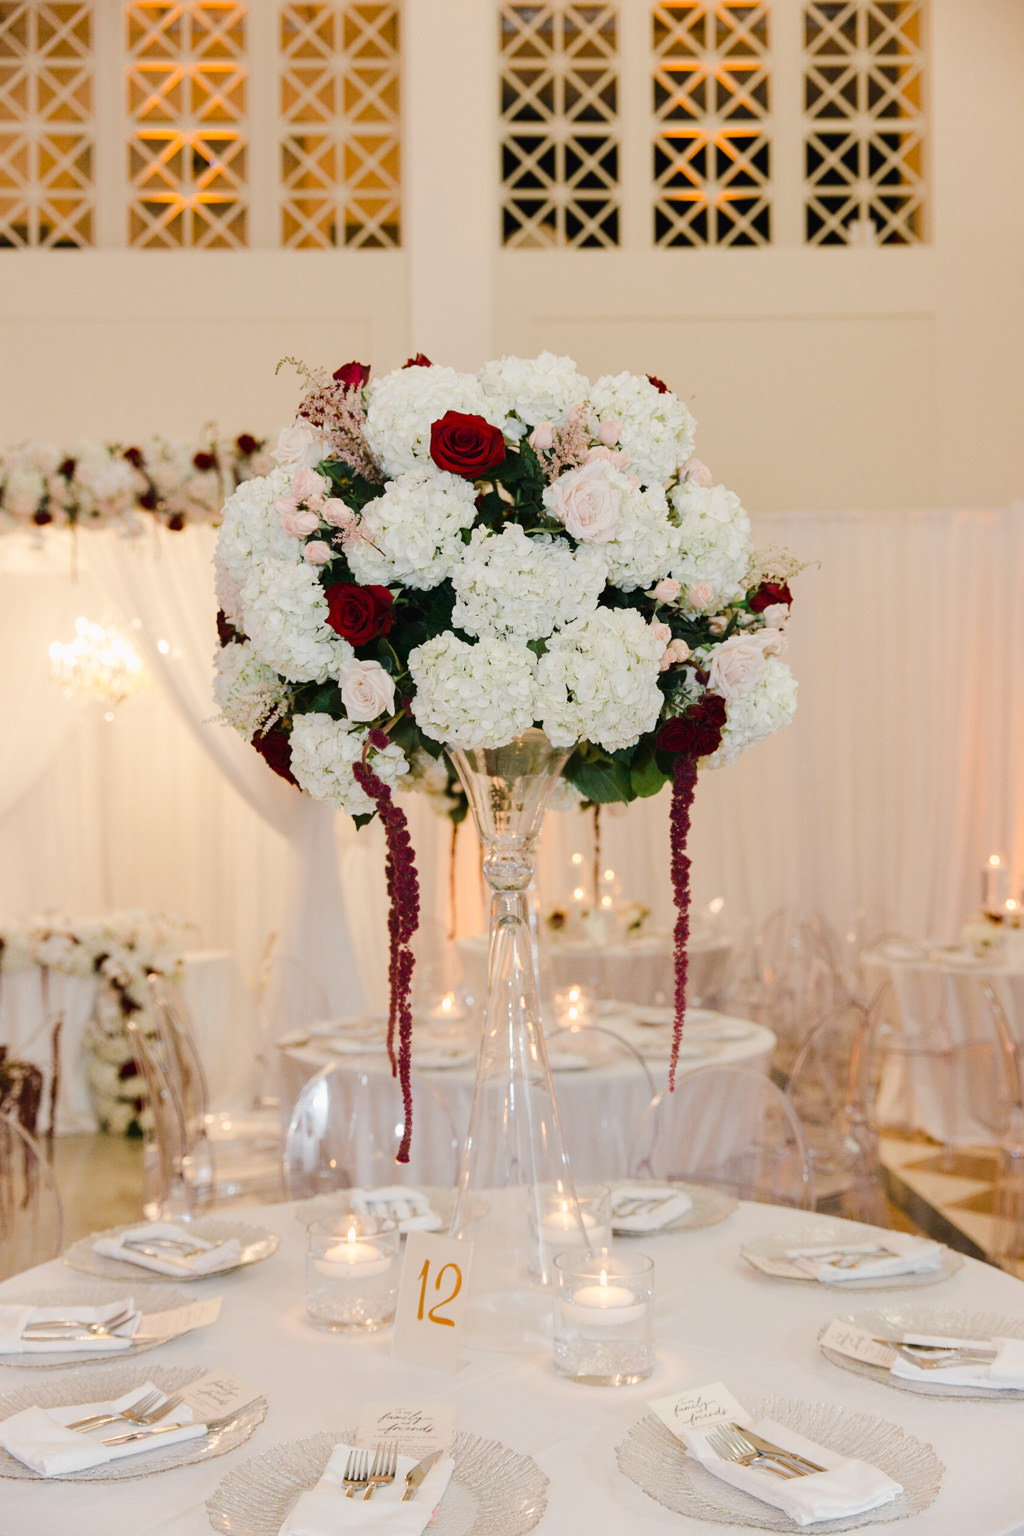 Elegant Wedding Reception Decor, Round Tables with White Tablecloths, Acrylic Ghost Chairs, Tall Glass Vase with White and Blush Pink Hydrangeas with Dark Red Hanging Amaranthus | Tampa Bay Wedding Venue The Vault | Wedding Florist and Rentals Gabro Event Services